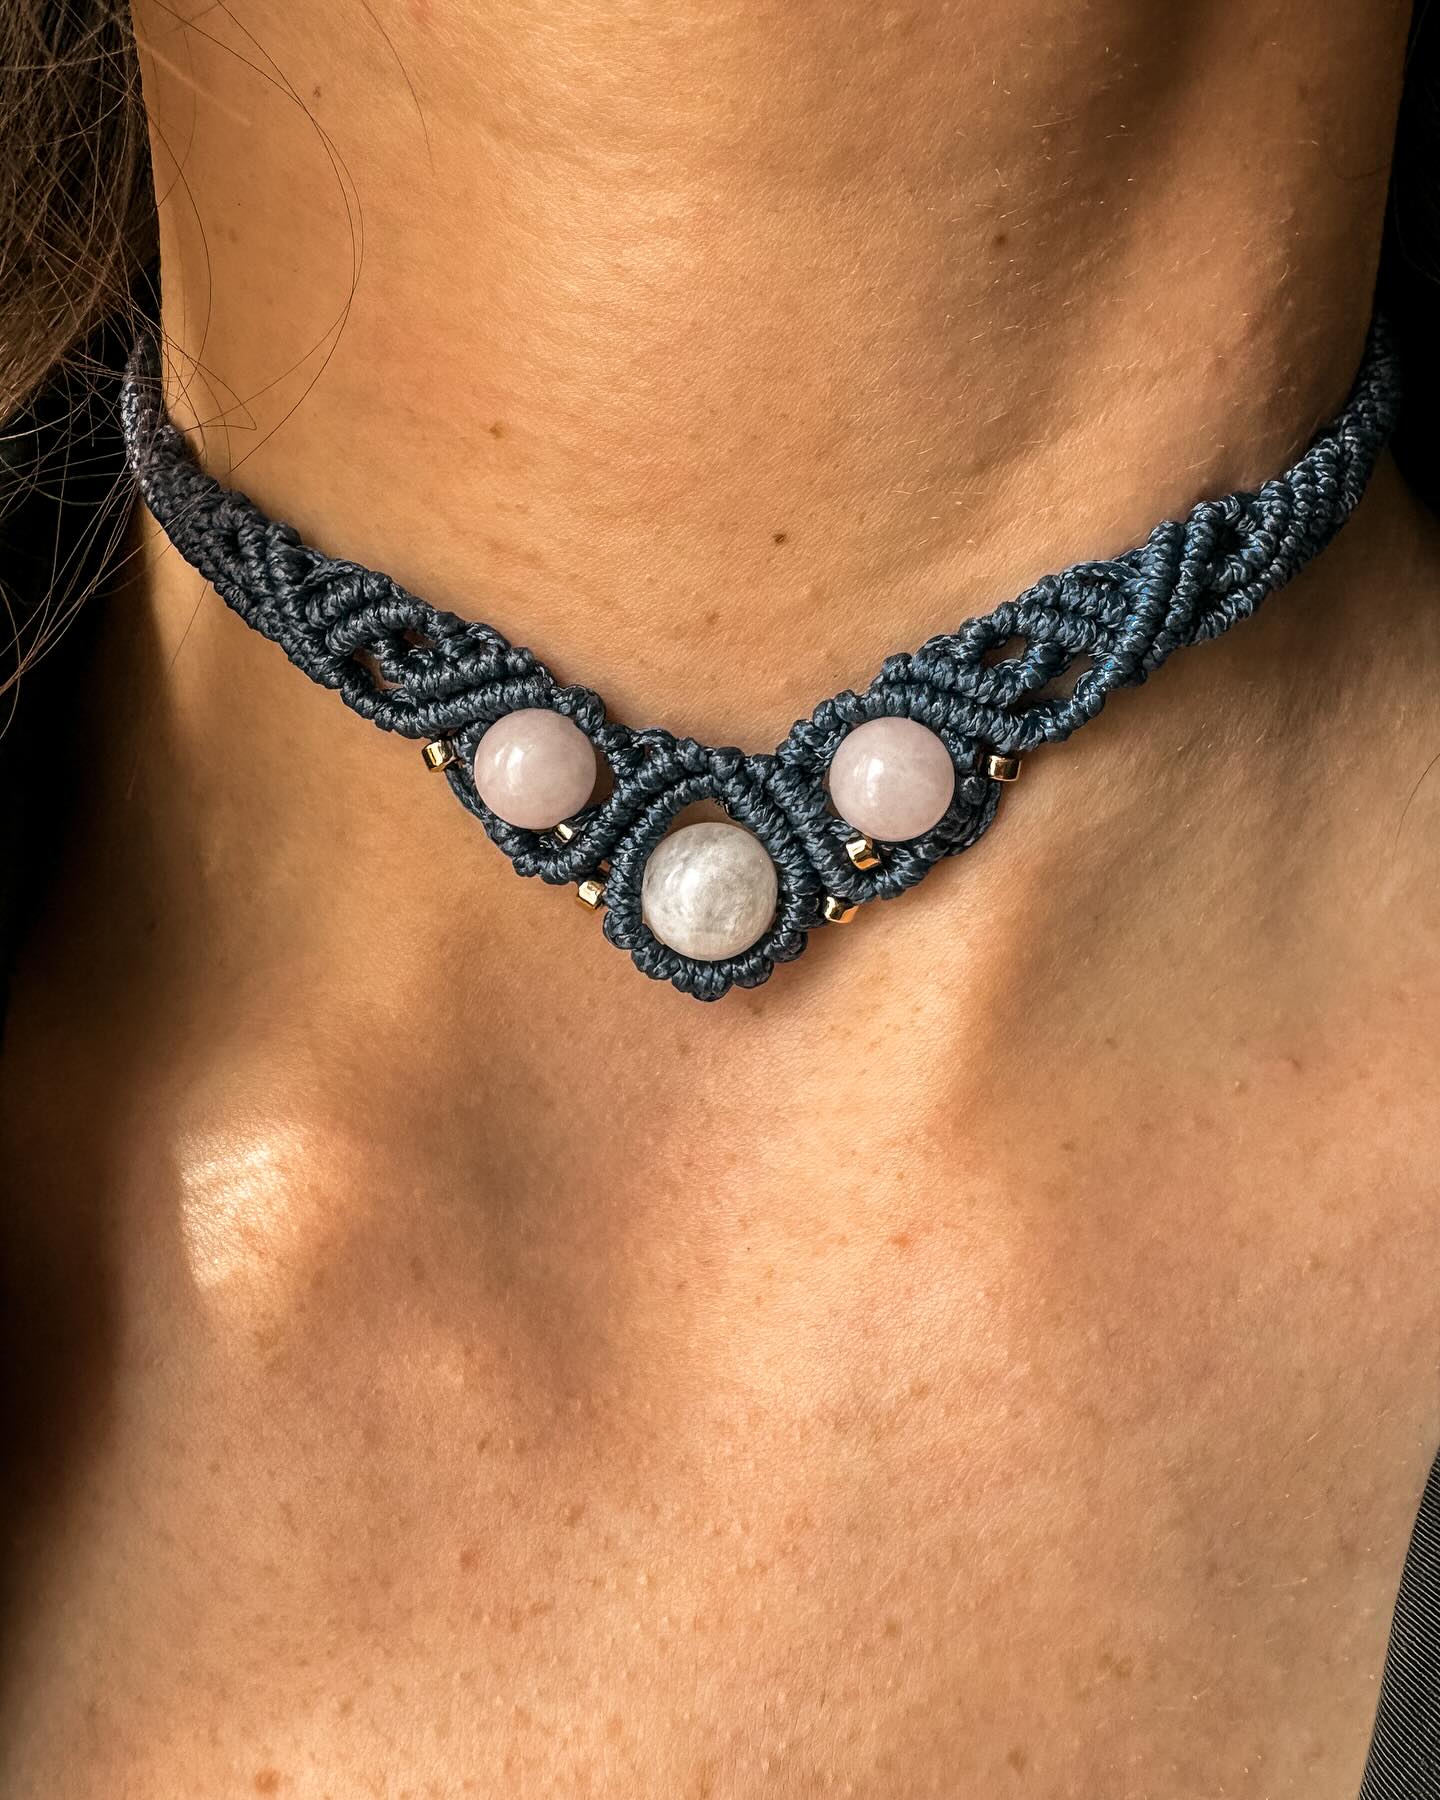 Macrame necklace with moonstone and rose quartz.